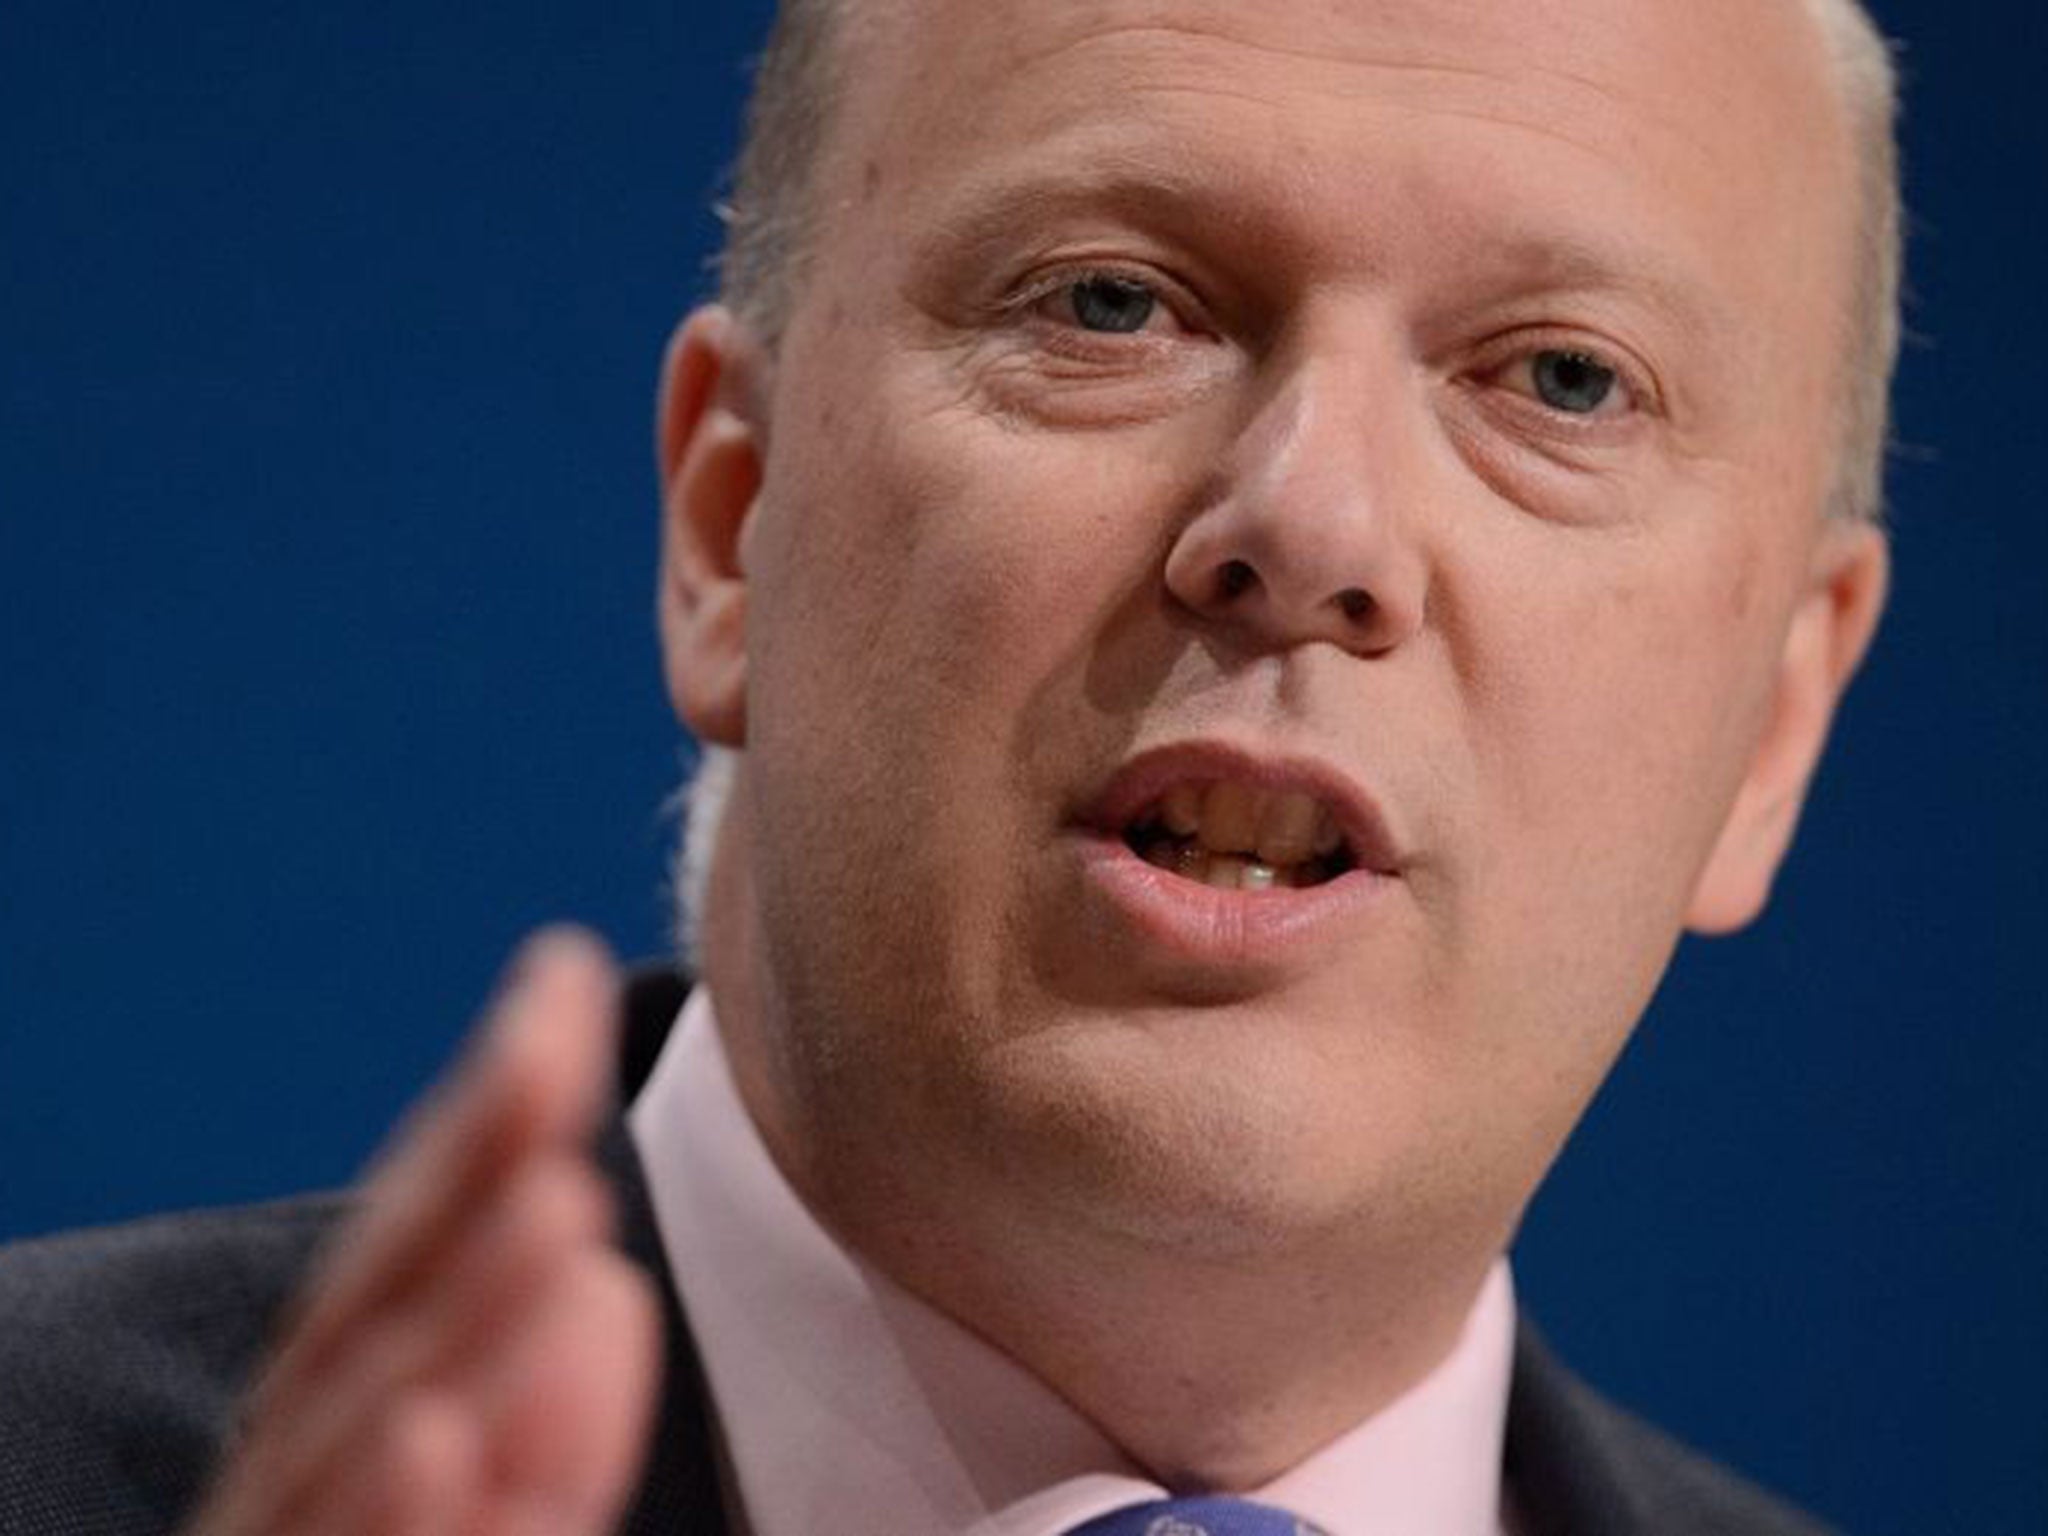 Chris Grayling failed to disclose that two 'independent' members of the selection panel were Tory party members